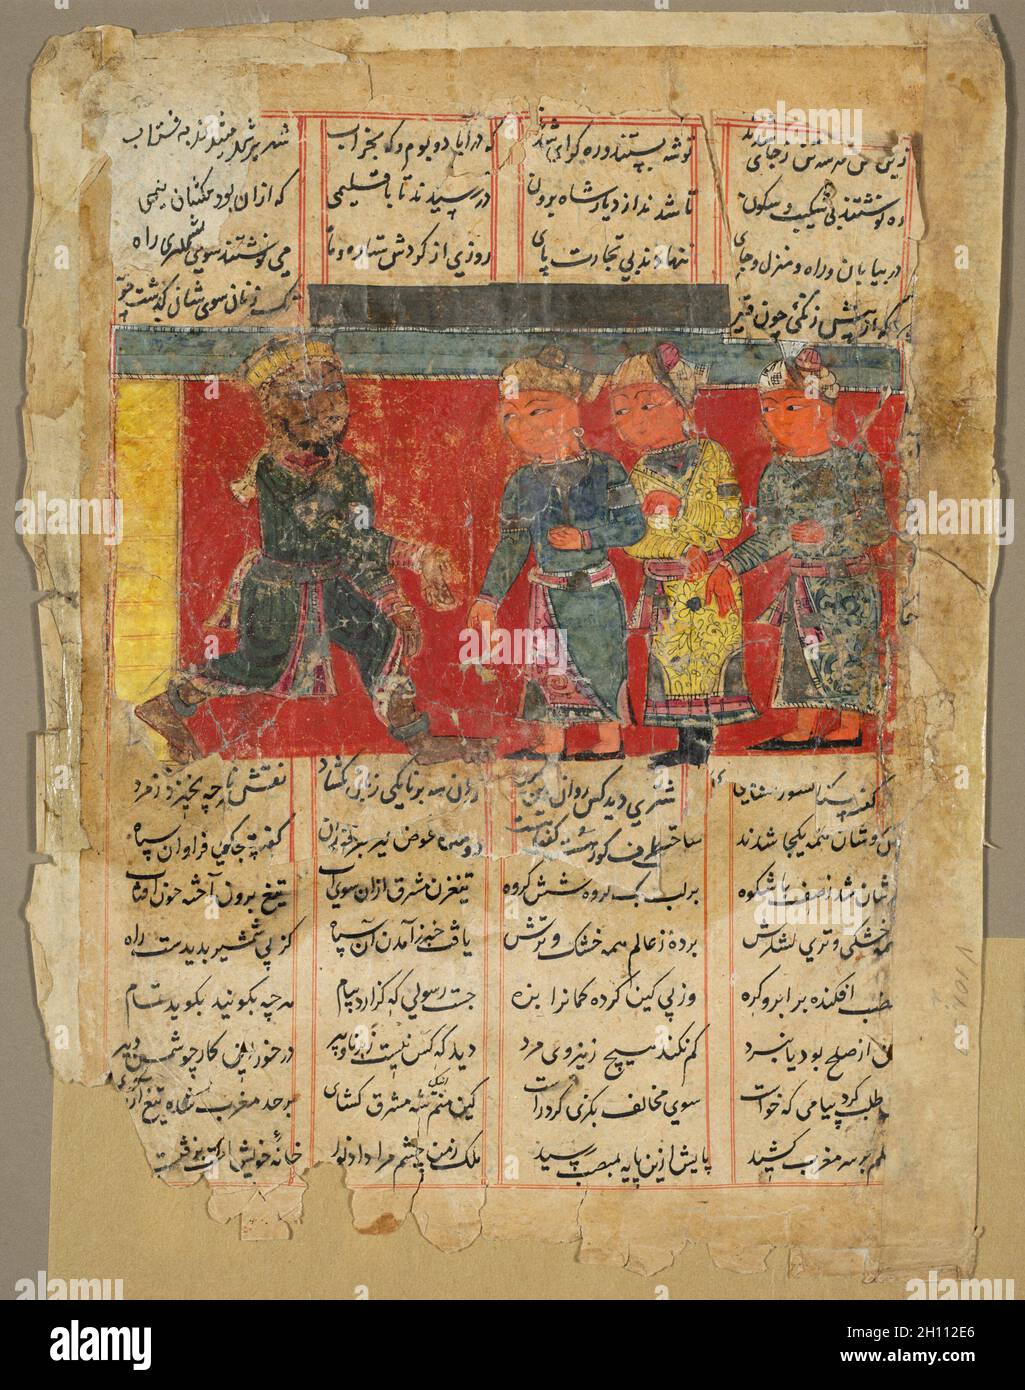 An East African King Receives Three Emissaries, from a Khamsa of Amir Khusrau Dihlavi, c. 1450. India, Sultanate period. Gum tempera and ink on paper; overall: 28.6 x 21.6 cm (11 1/4 x 8 1/2 in.). Stock Photo